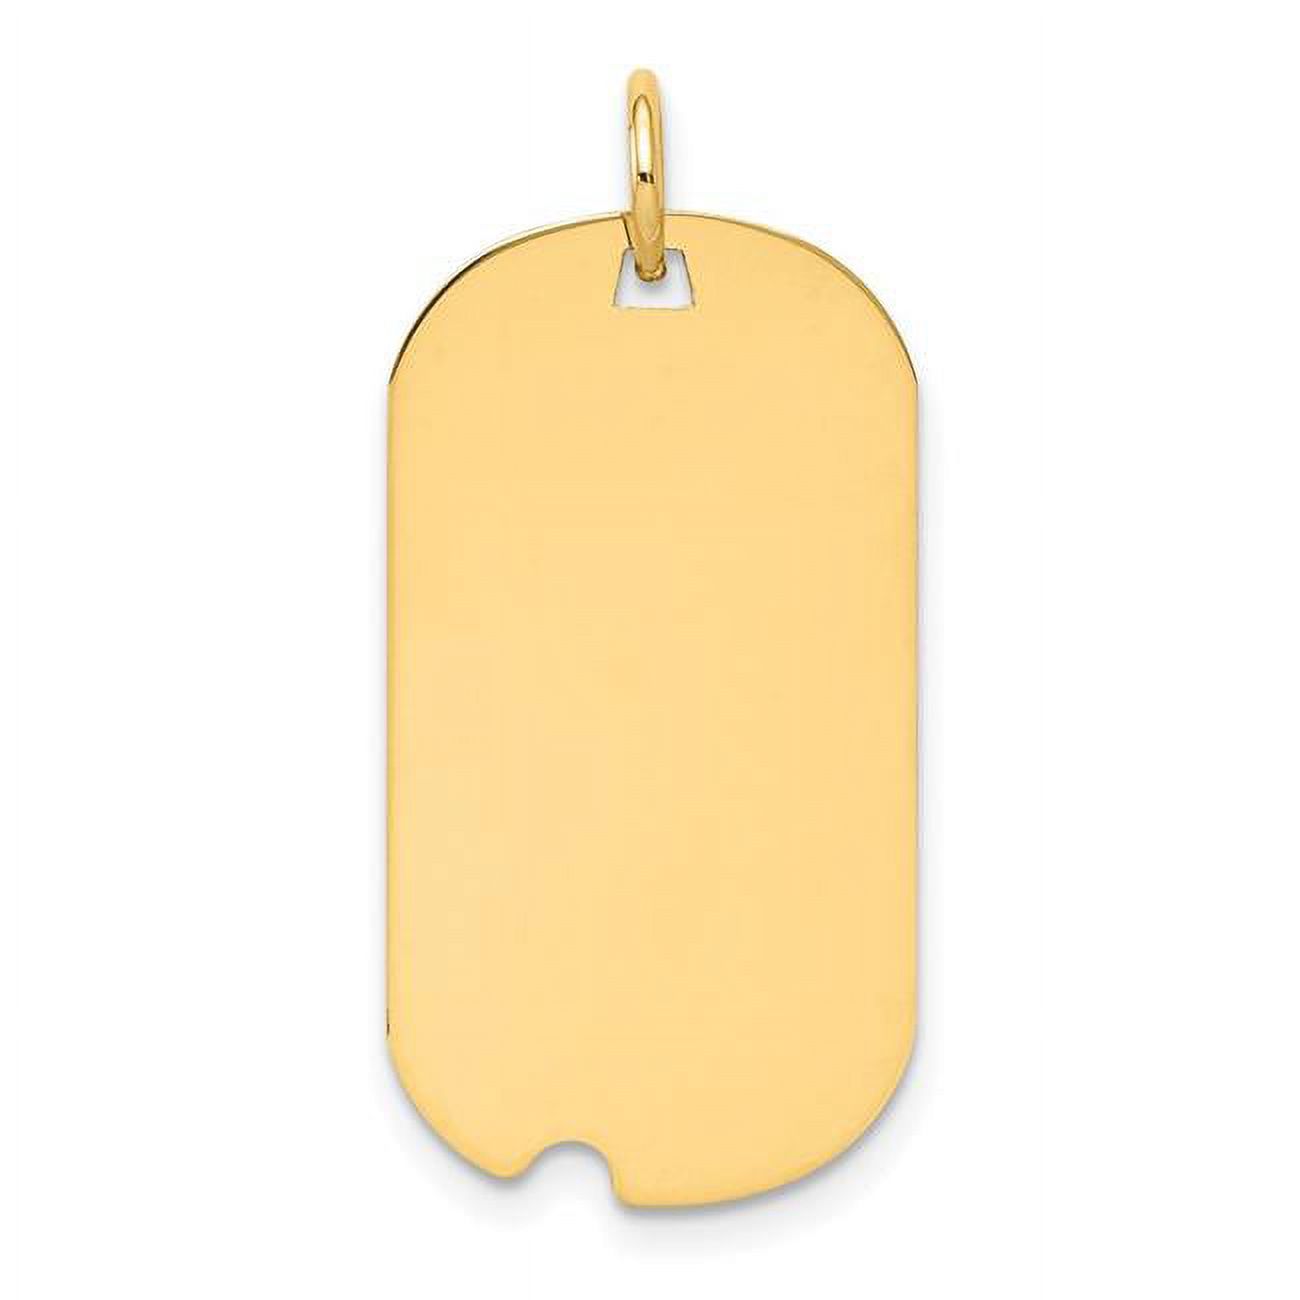 FJC Finejewelers 14k Yellow Gold Plain .013 Gauge Engraveable Dog Tag with Notch Disc Charm - image 1 of 2